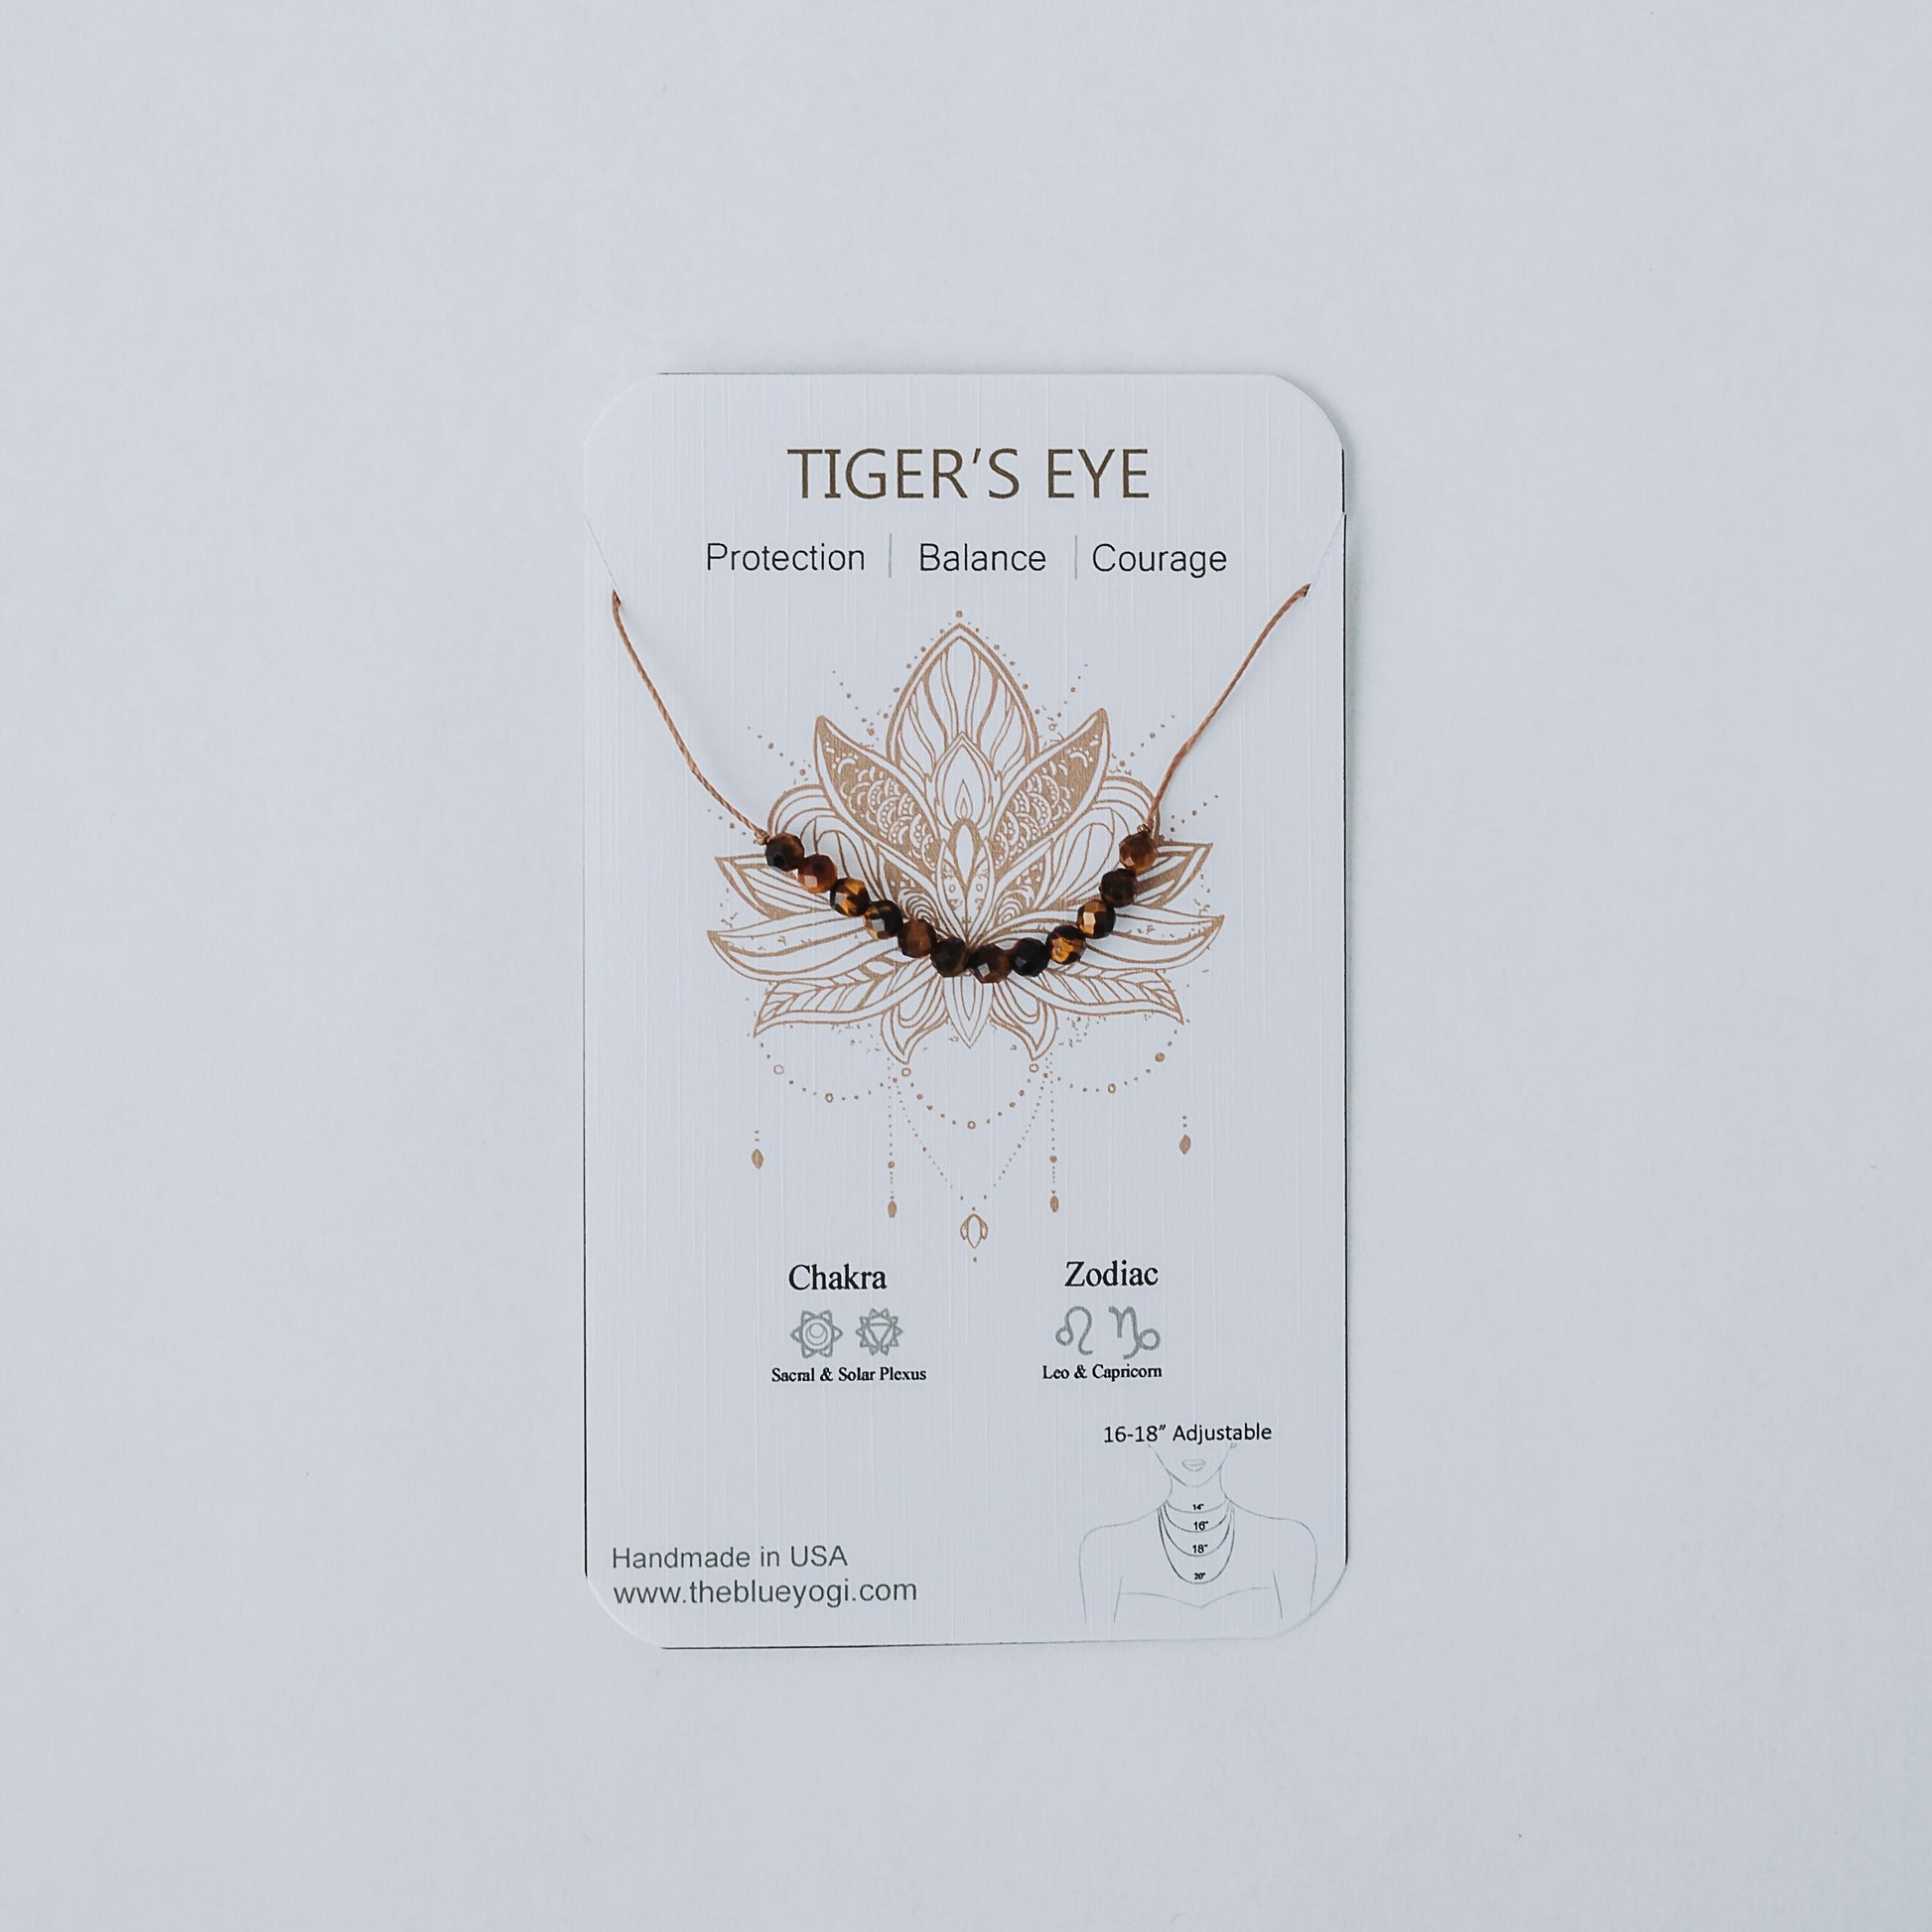 Dainty 4mm Faceted Tiger Eye and Sterling silver Necklace - Minimal, casual and light weight - 16”- 18” adjustable - Theblueyogi